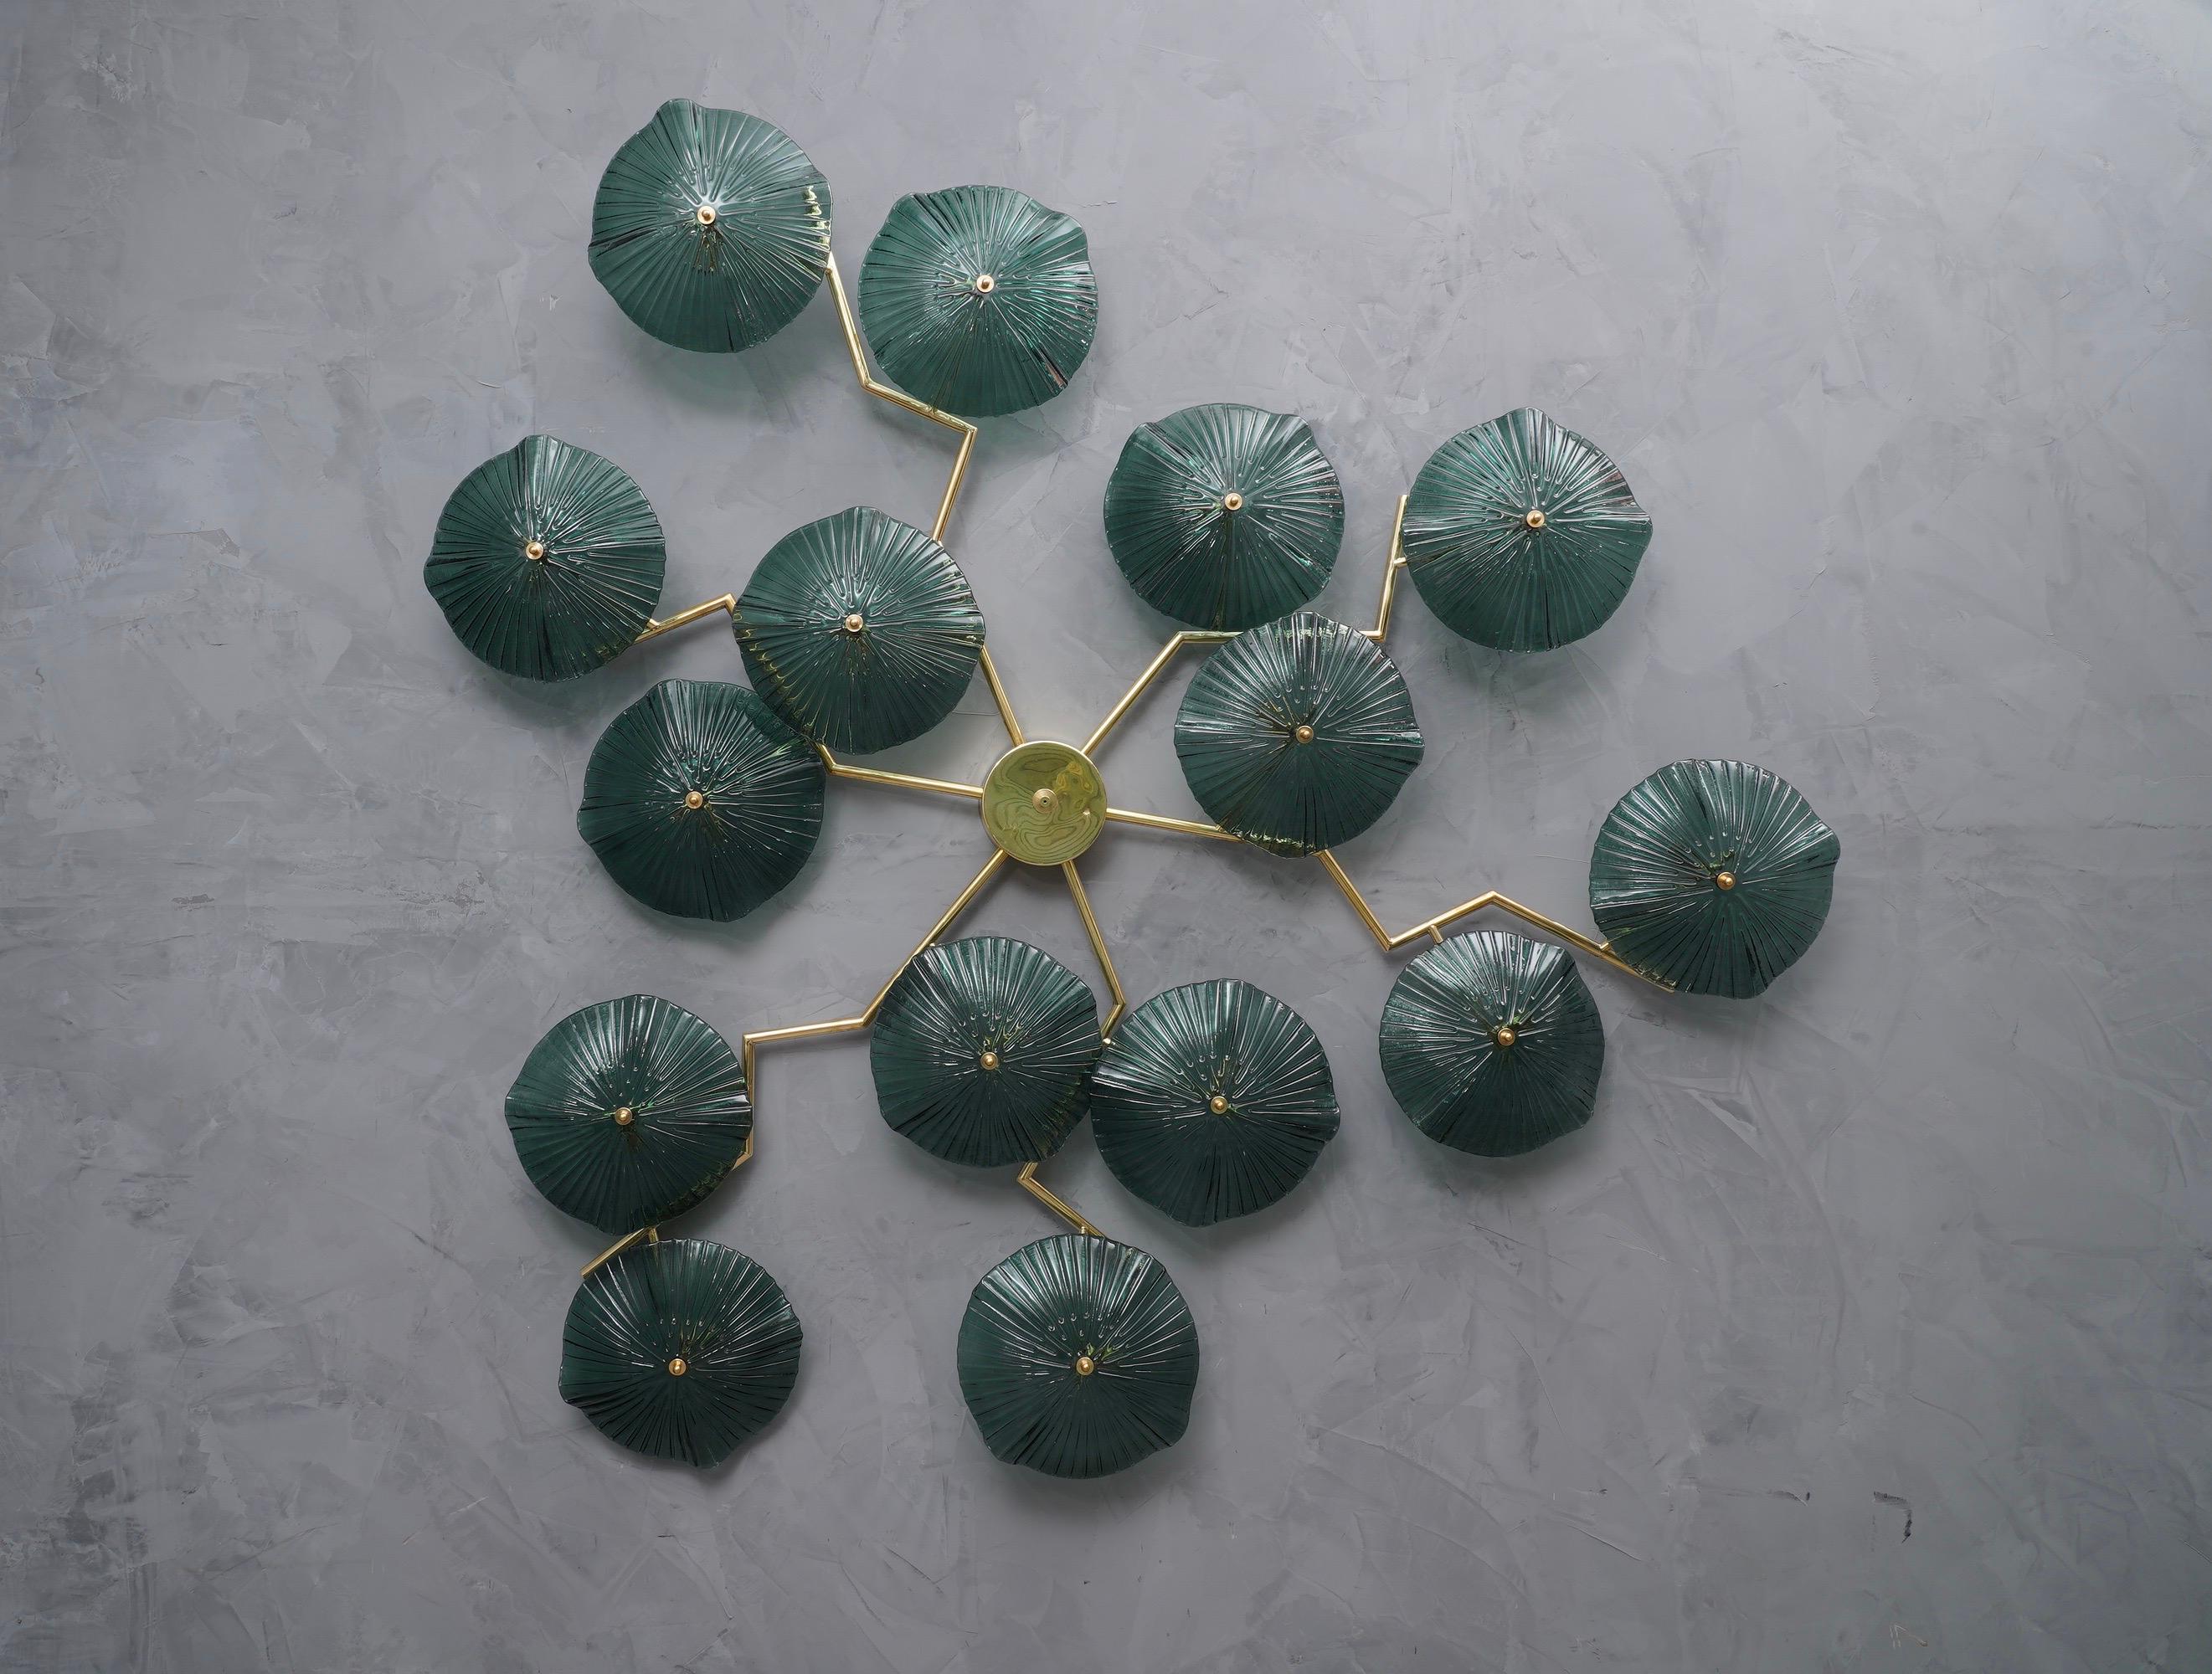 Amazing Murano piece which can be mounted both as applique and as a ceiling chandelier. Particular and original applique from the manufacture of Murano glassworks.

The wall Light / chandelier has a brass structure, in the shape of a climbing plant.